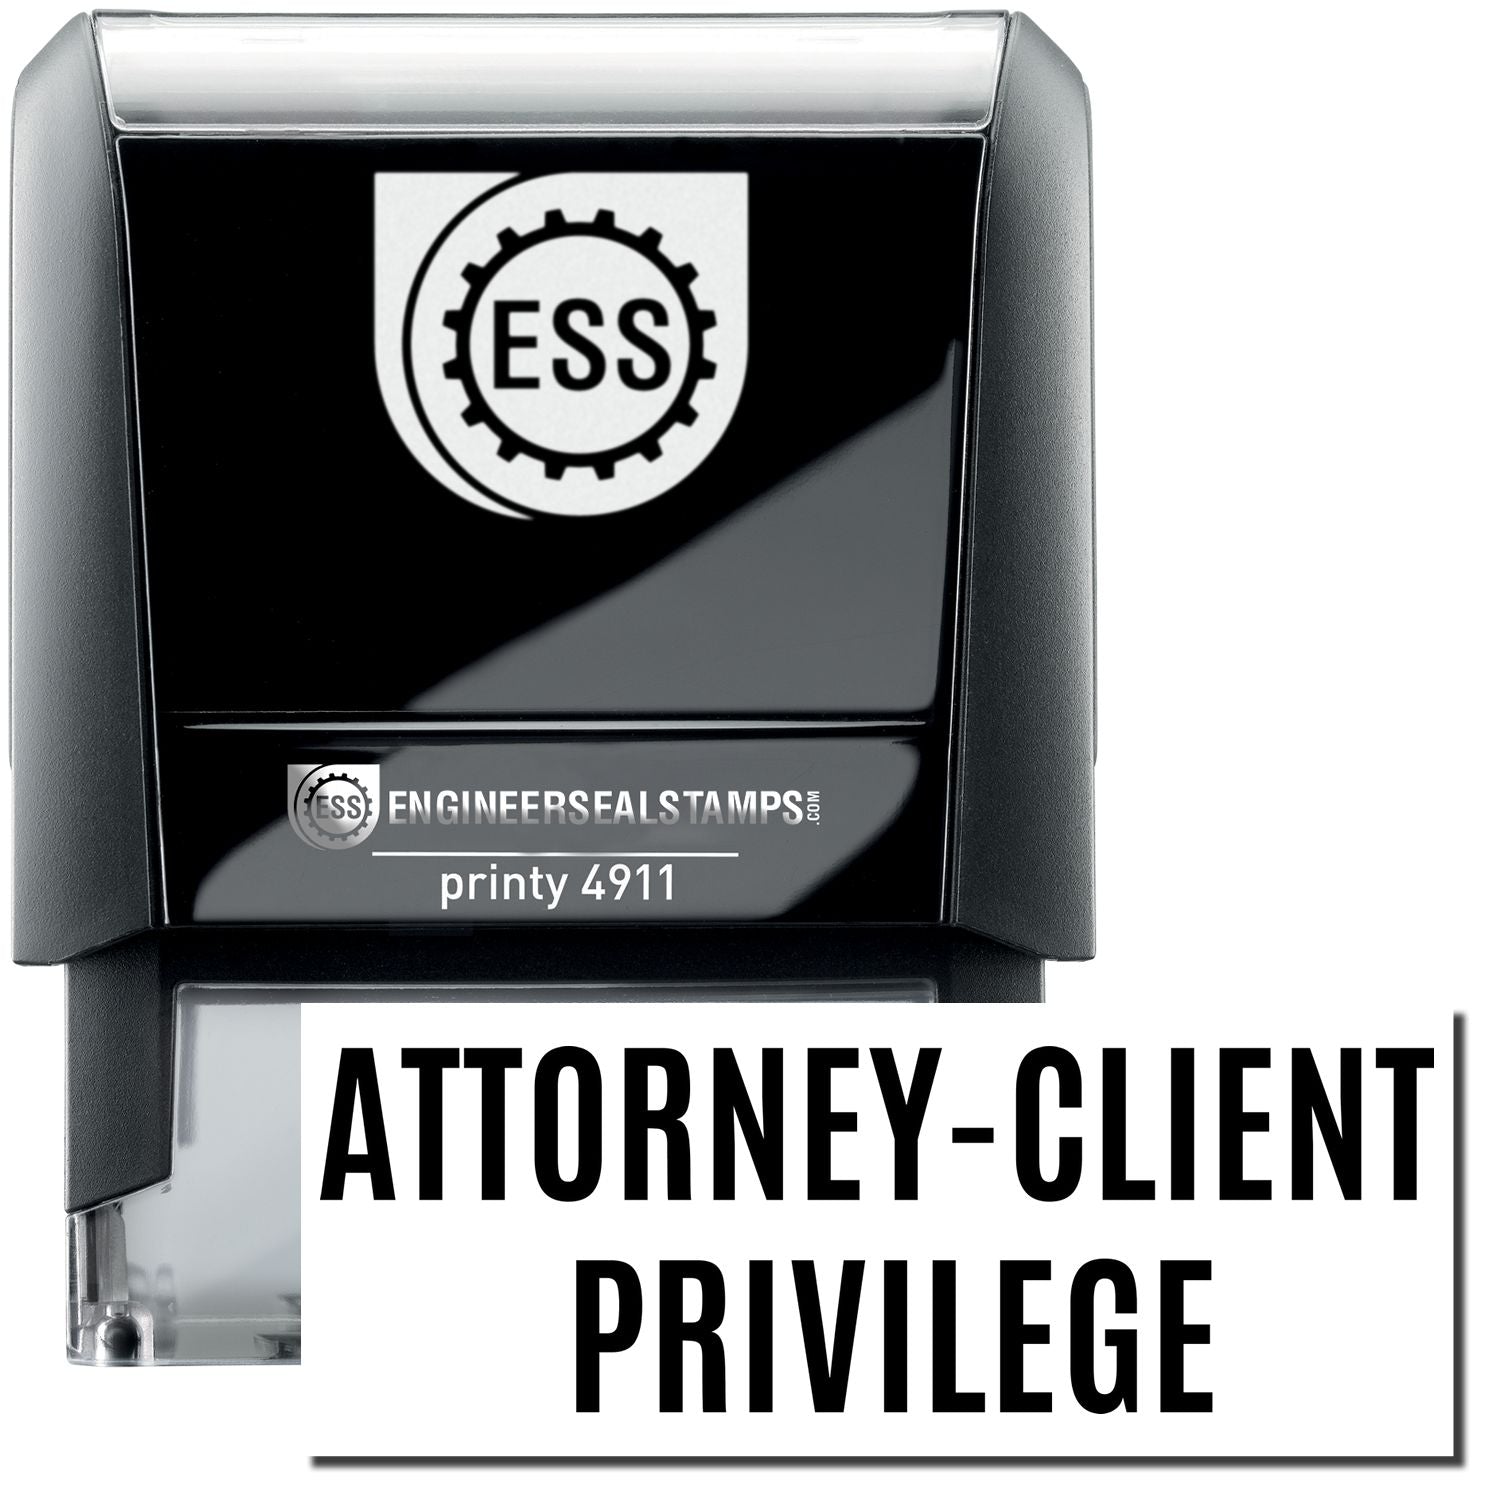 A self-inking stamp with a stamped image showing how the text "ATTORNEY-CLIENT PRIVILEGE" is displayed after stamping.